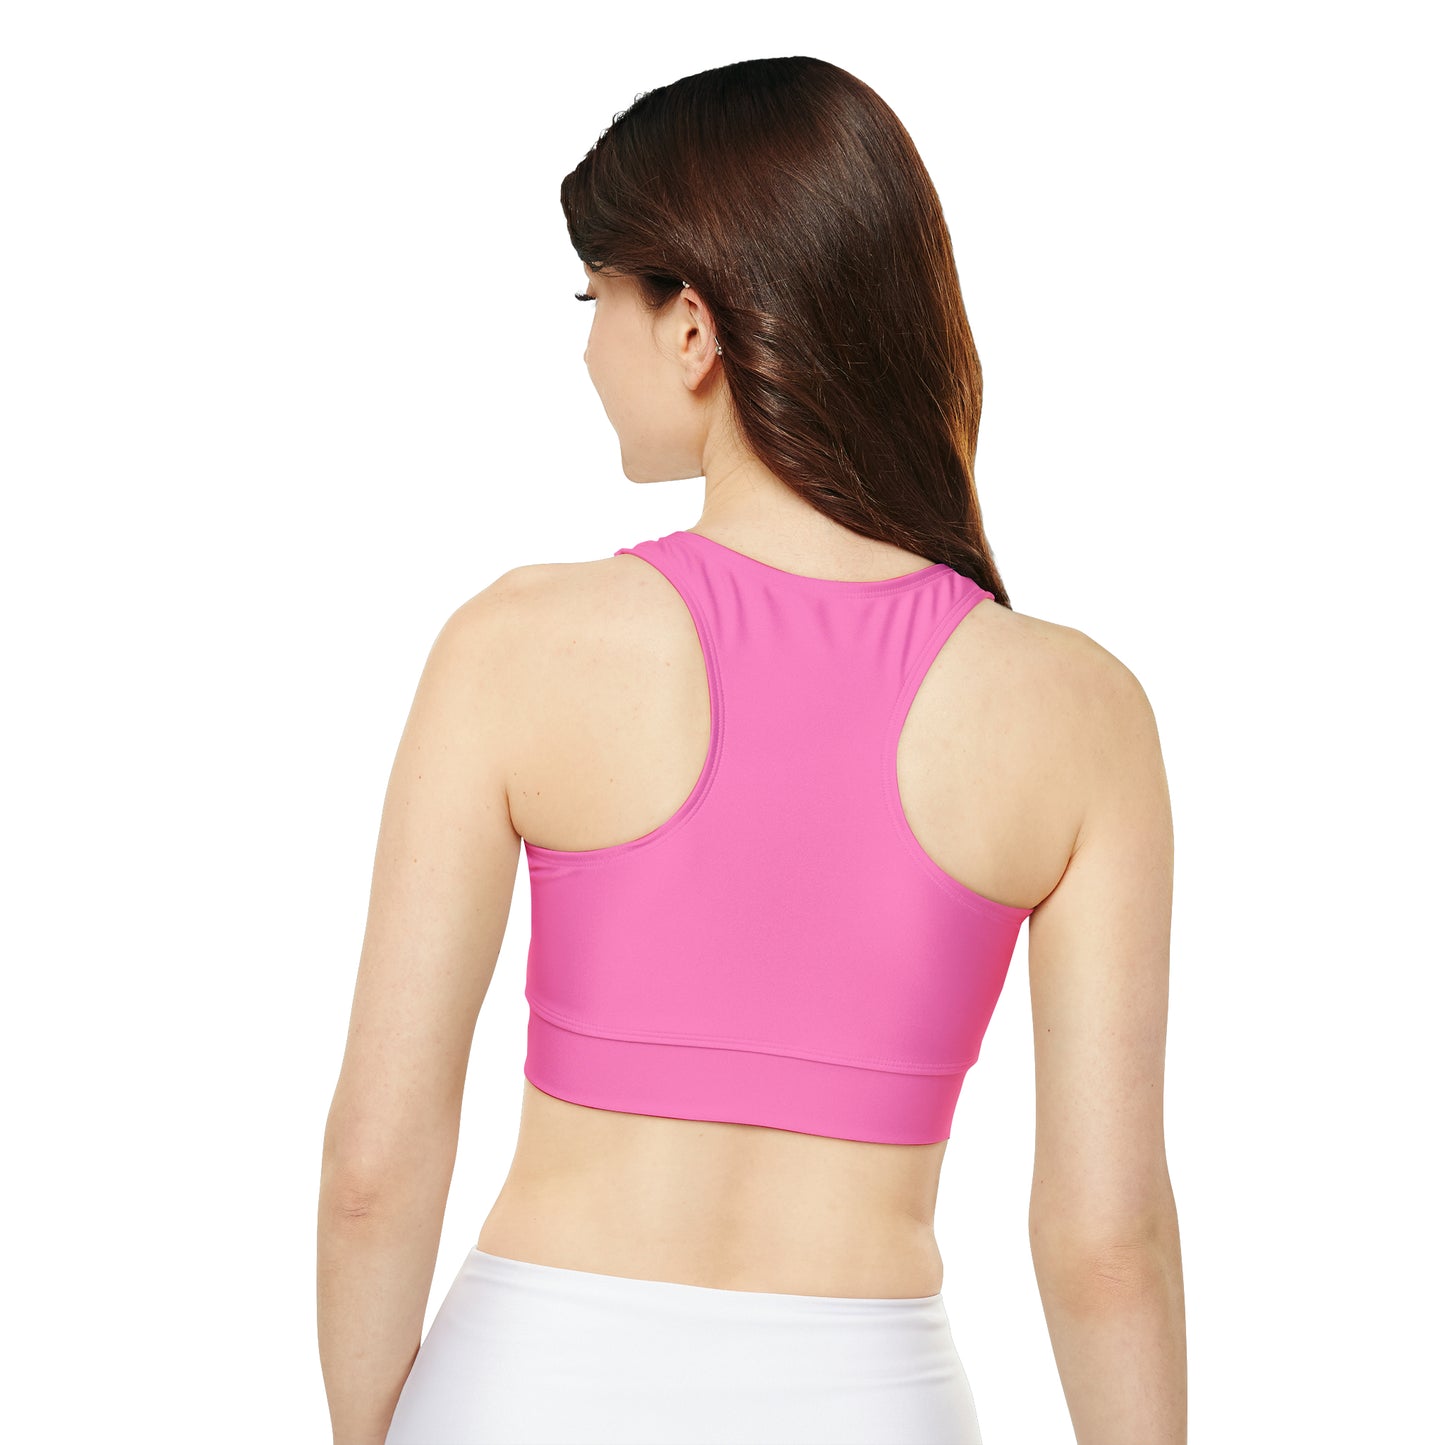 Rose Pink Fully Lined, Padded Sports Bra